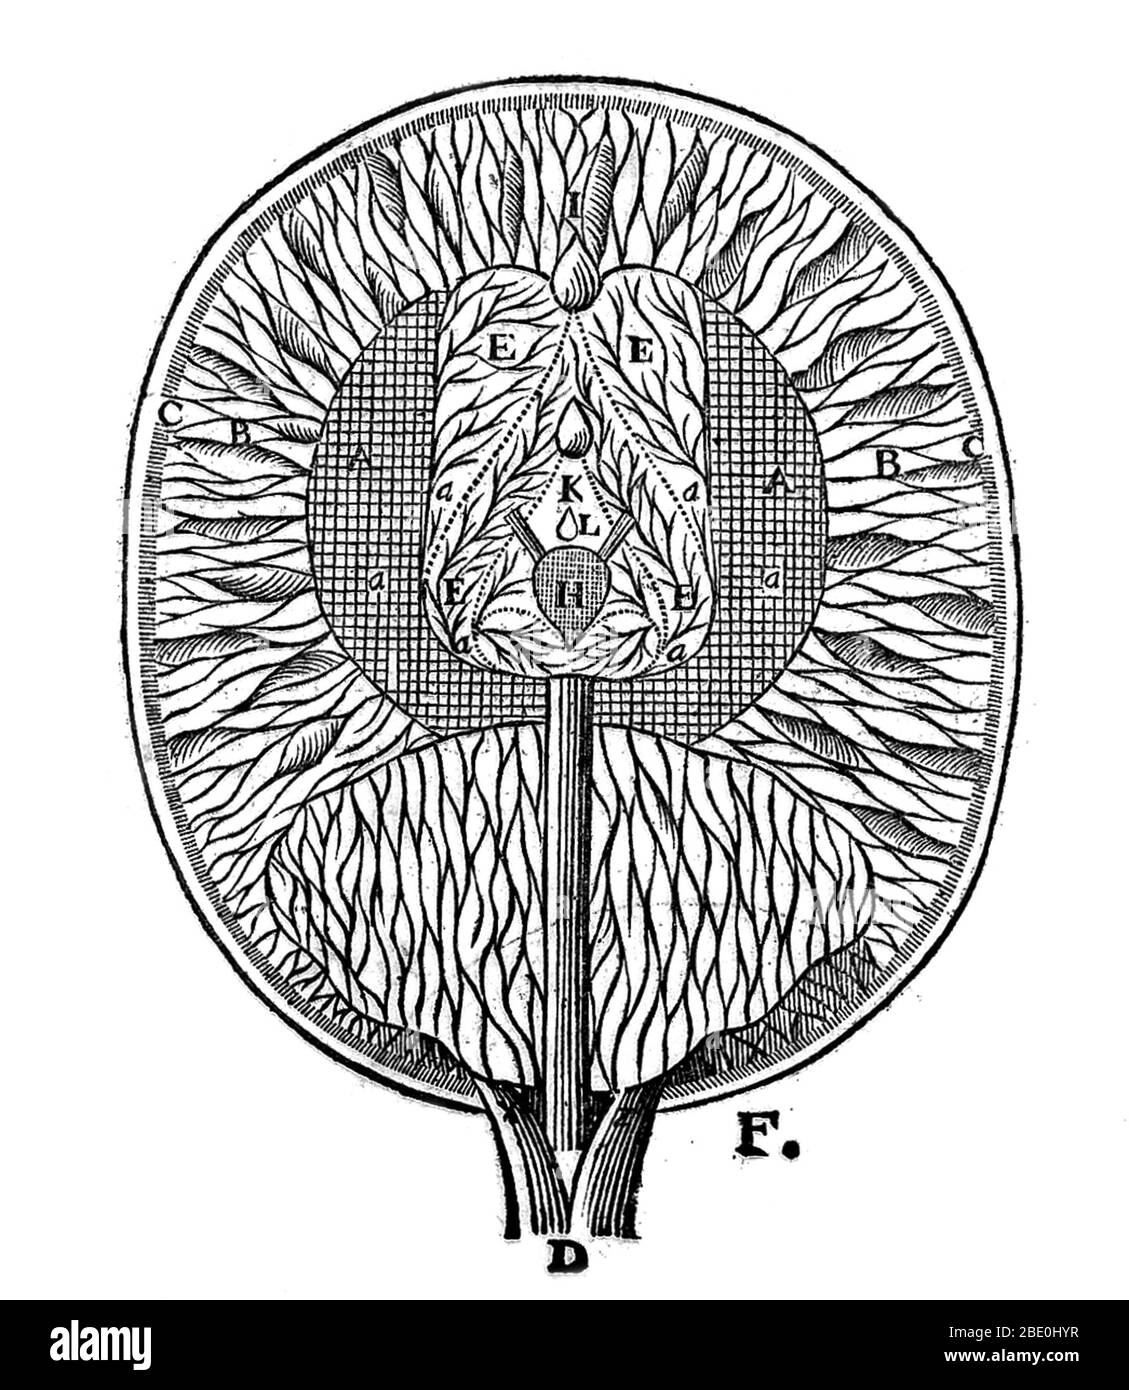 Descartes: Diagram showing the ventricles of the brain (E) and pineal gland (H). A & B are fibers ending in walls of ventricles. Illustration from 1664. Rene Descartes (1596 -1650), French mathematician and philosopher, created co-ordinate geometry, a bridge between algebra and geometry, now known as Cartesian geometry. He is considered a founding father of modern philosophy, famous for his statement Cogito ergo sum (I think, therefore I am). Stock Photo